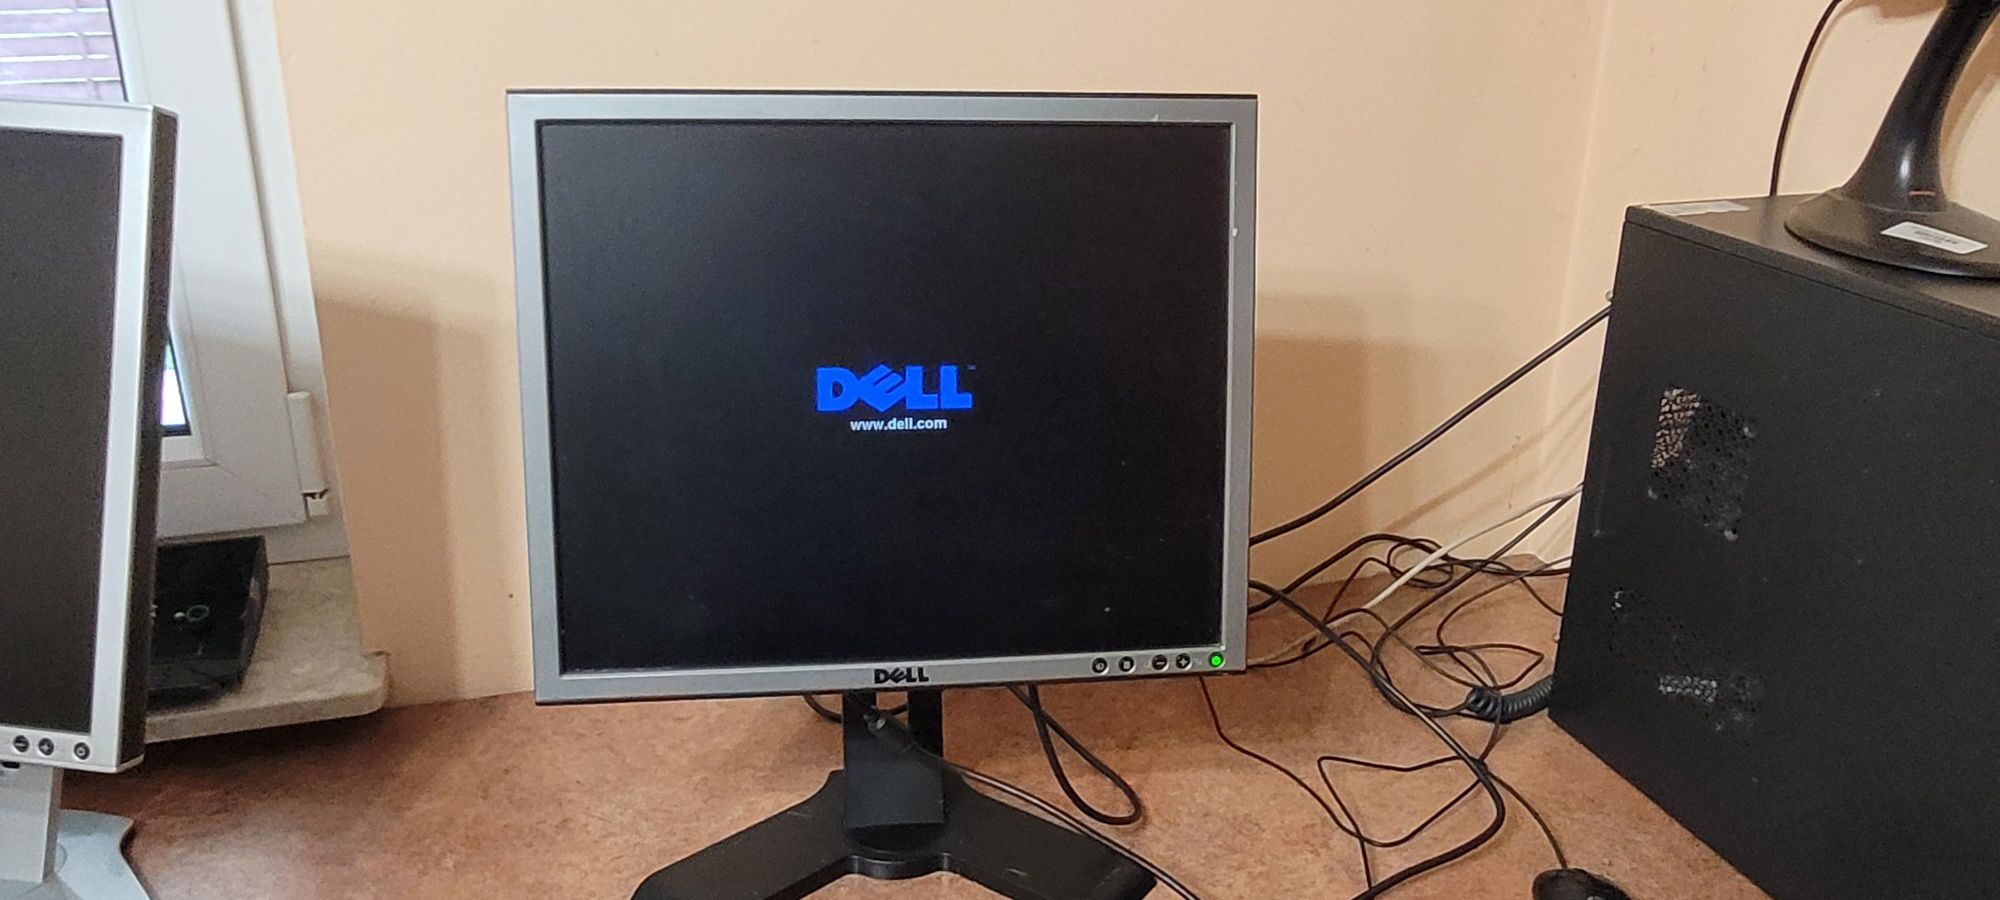 Monitor Dell 19" 17" business